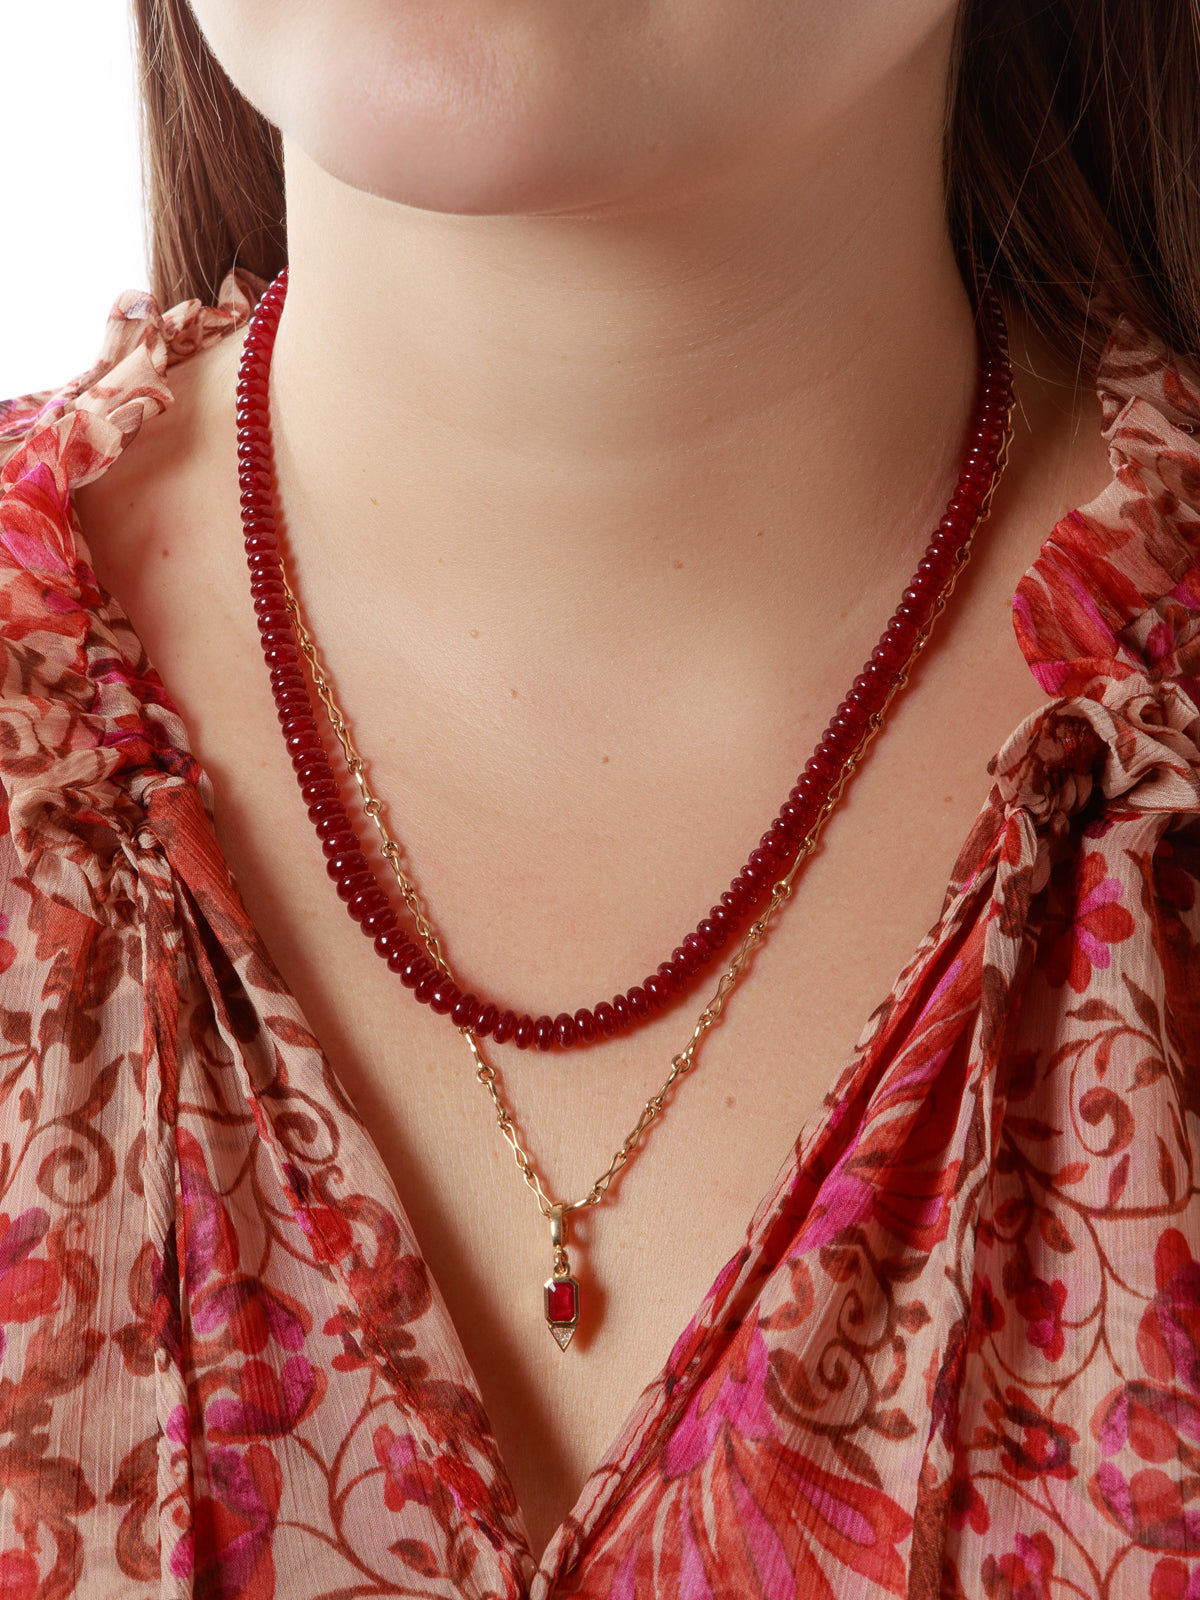  Red Coral Necklace Pendant Rose Gold Necklace Handmade